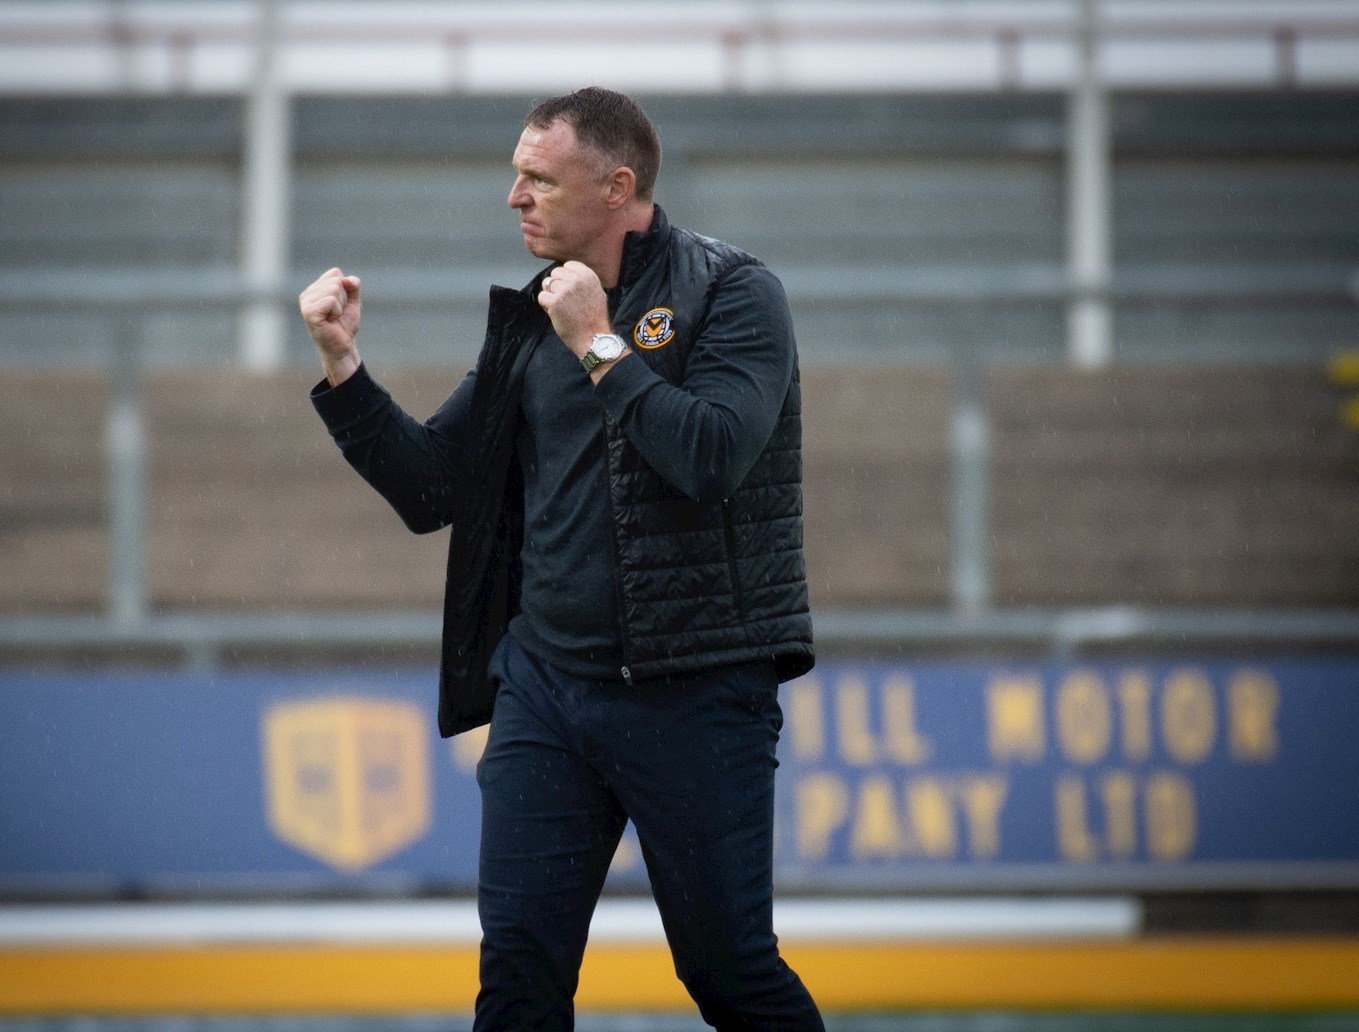 GRAHAM COUGHLAN: "The three points was vital." - News - Newport County